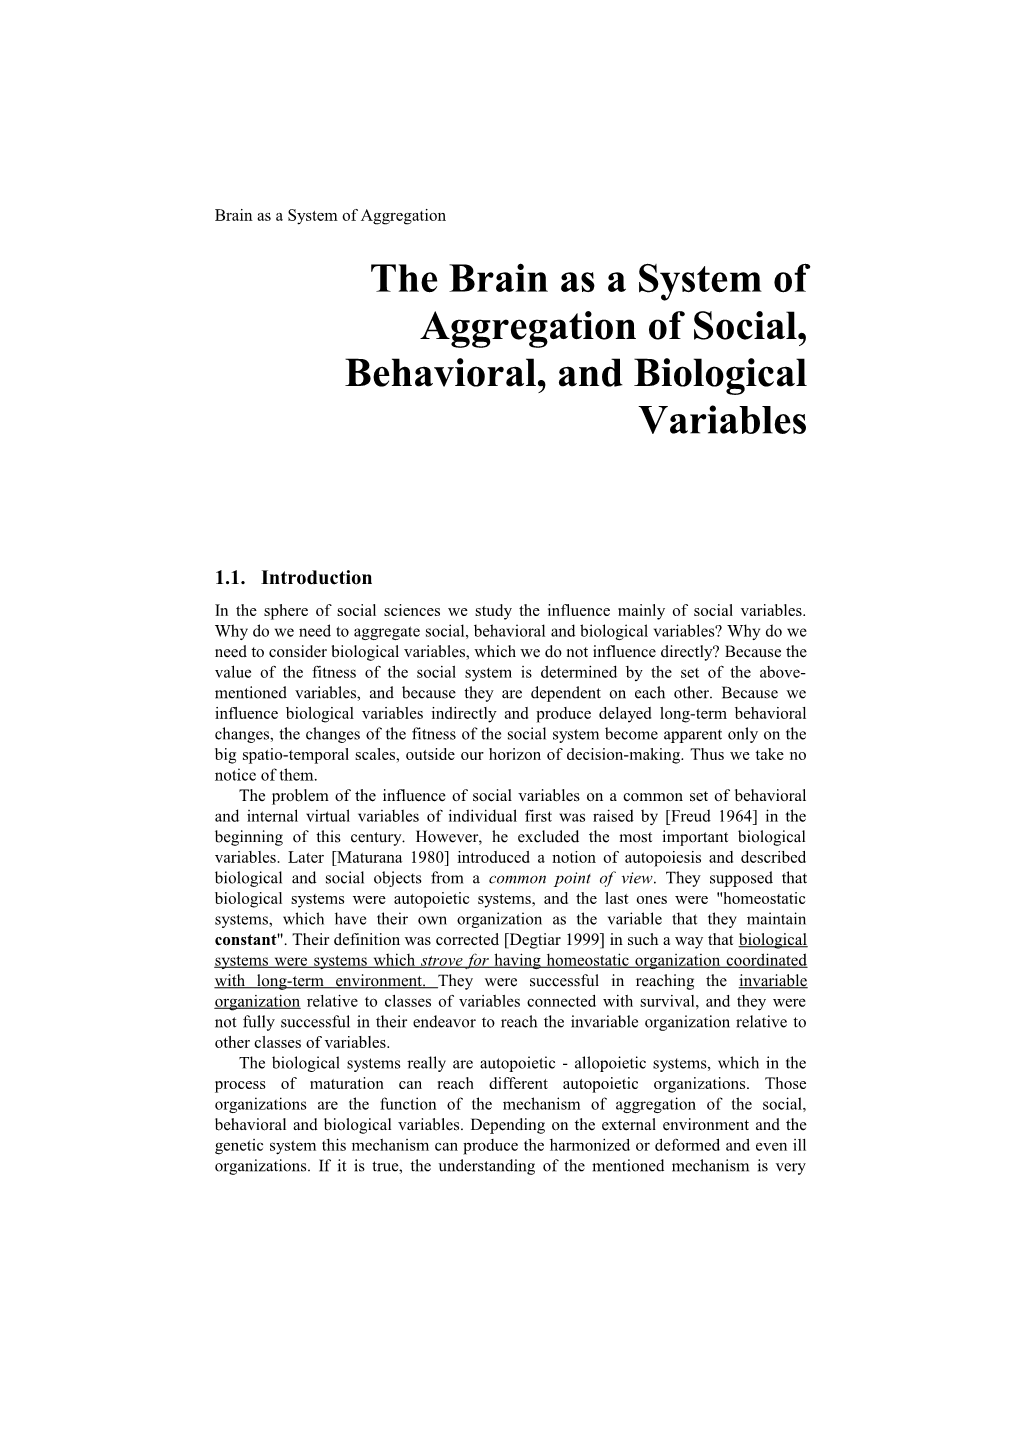 The Brain As a System of Aggregation of Social, Behavioral and Biological Variables